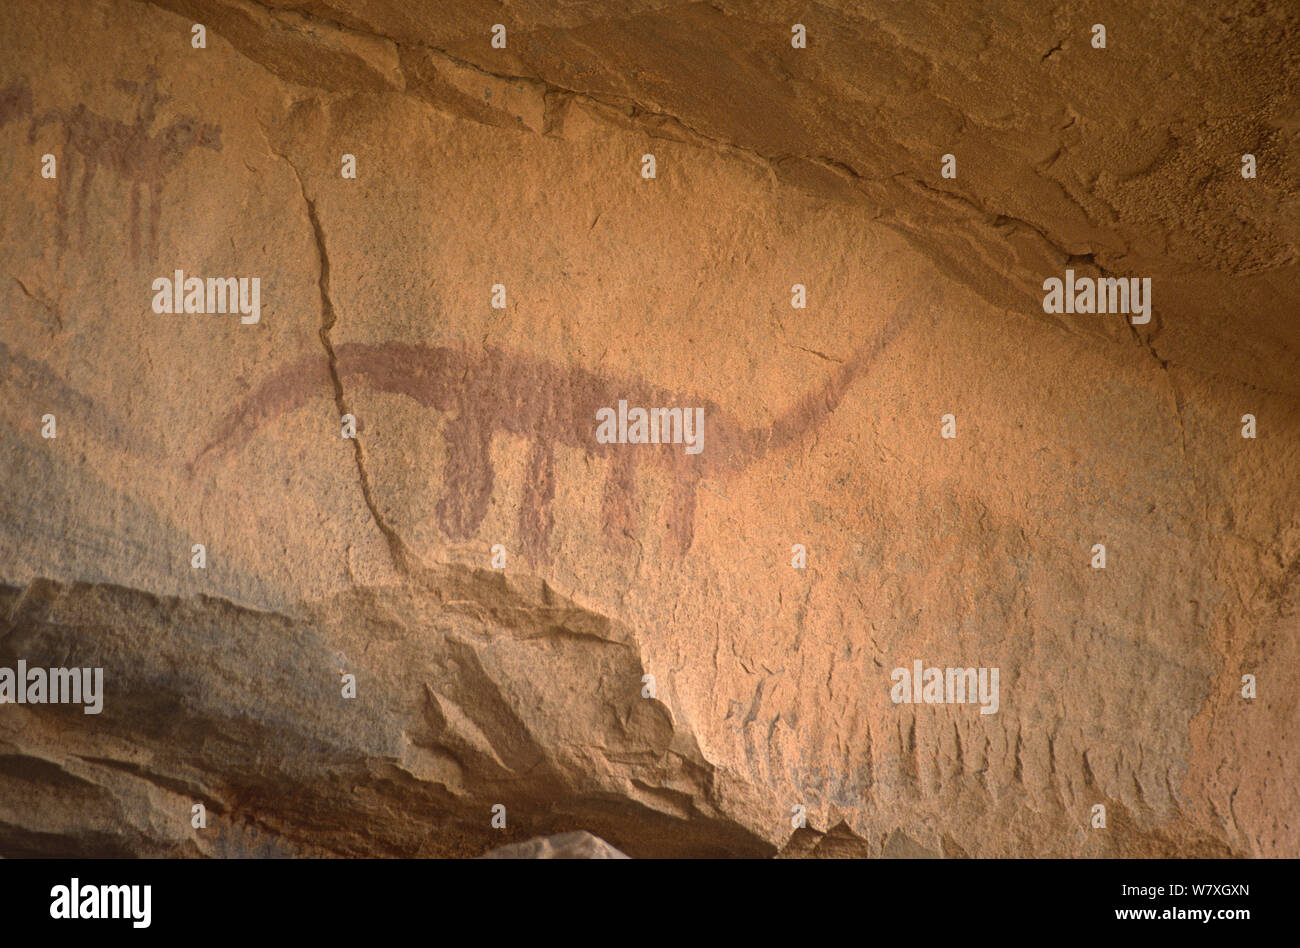 ancient-rock-painting-of-dinosaur-like-a